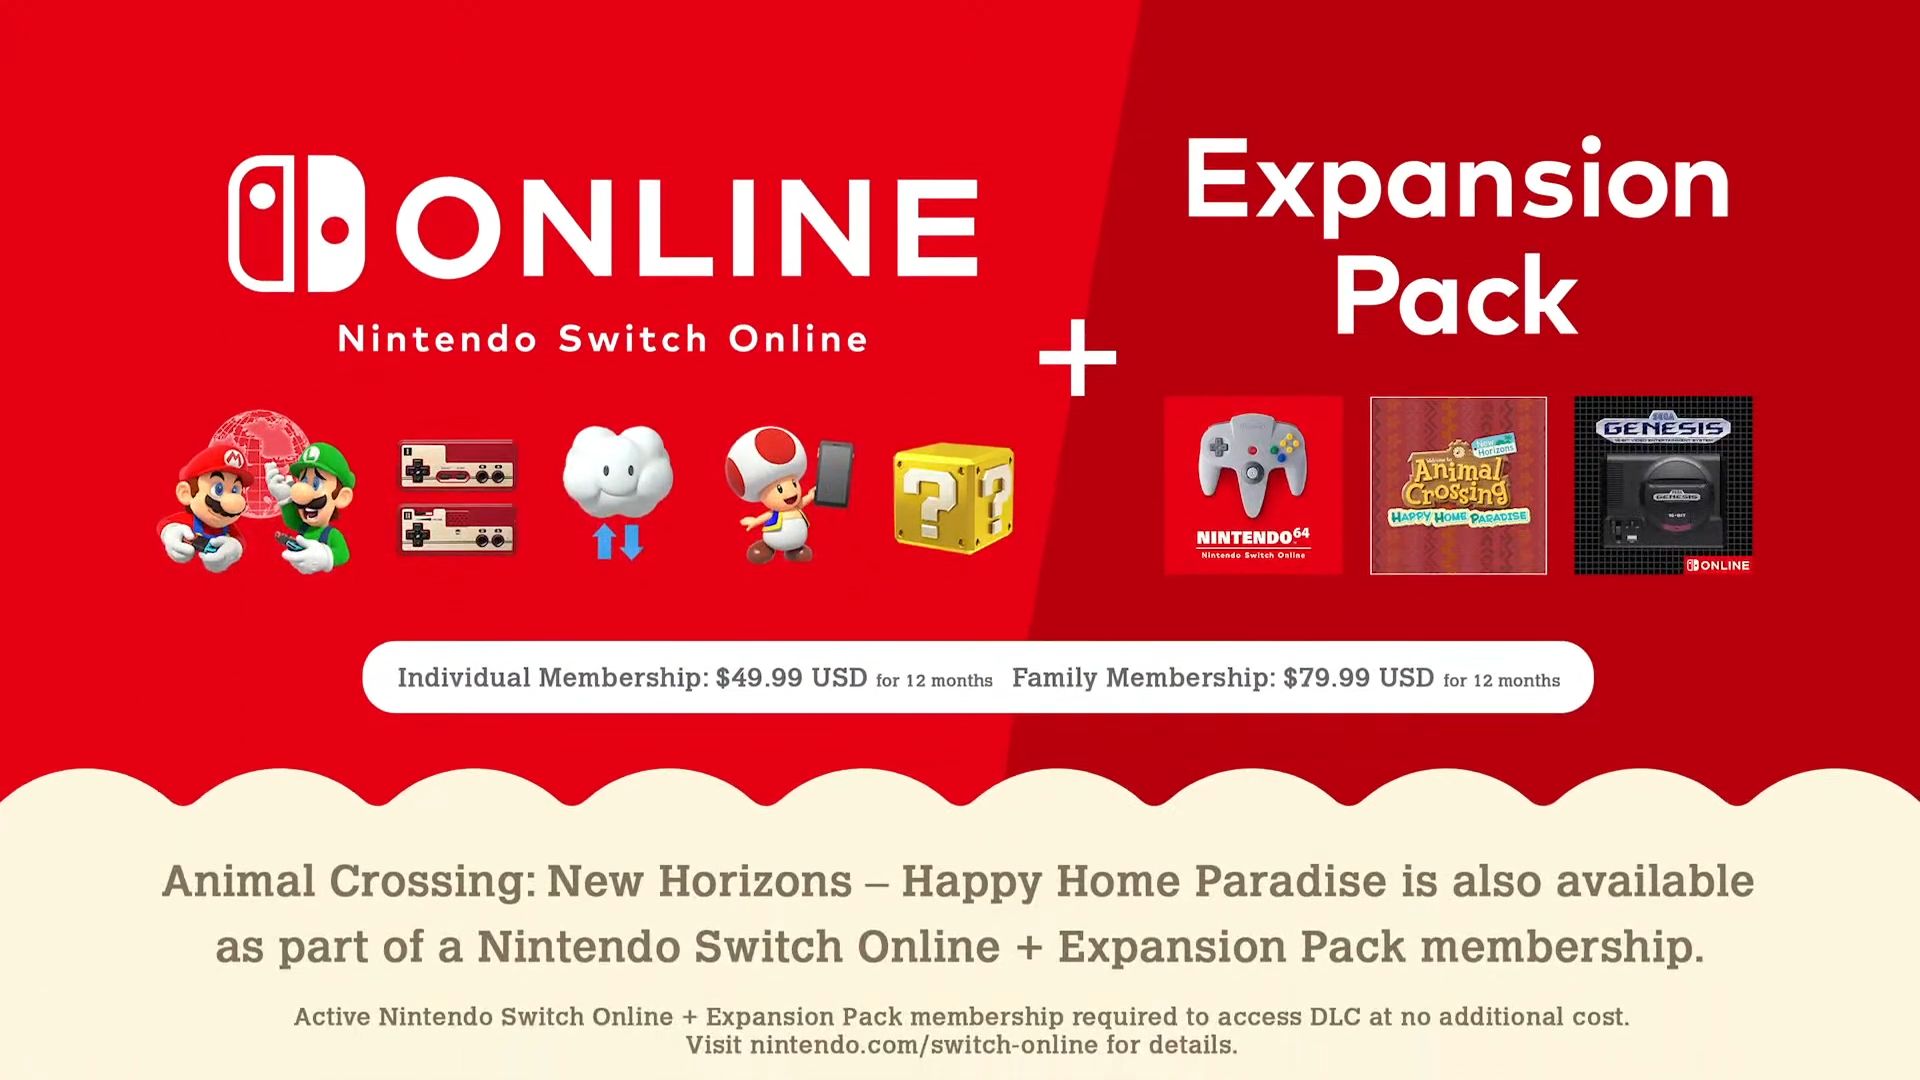 Nintendo Switch Online + Expansion Pack Costs $49.99 for 12 Months